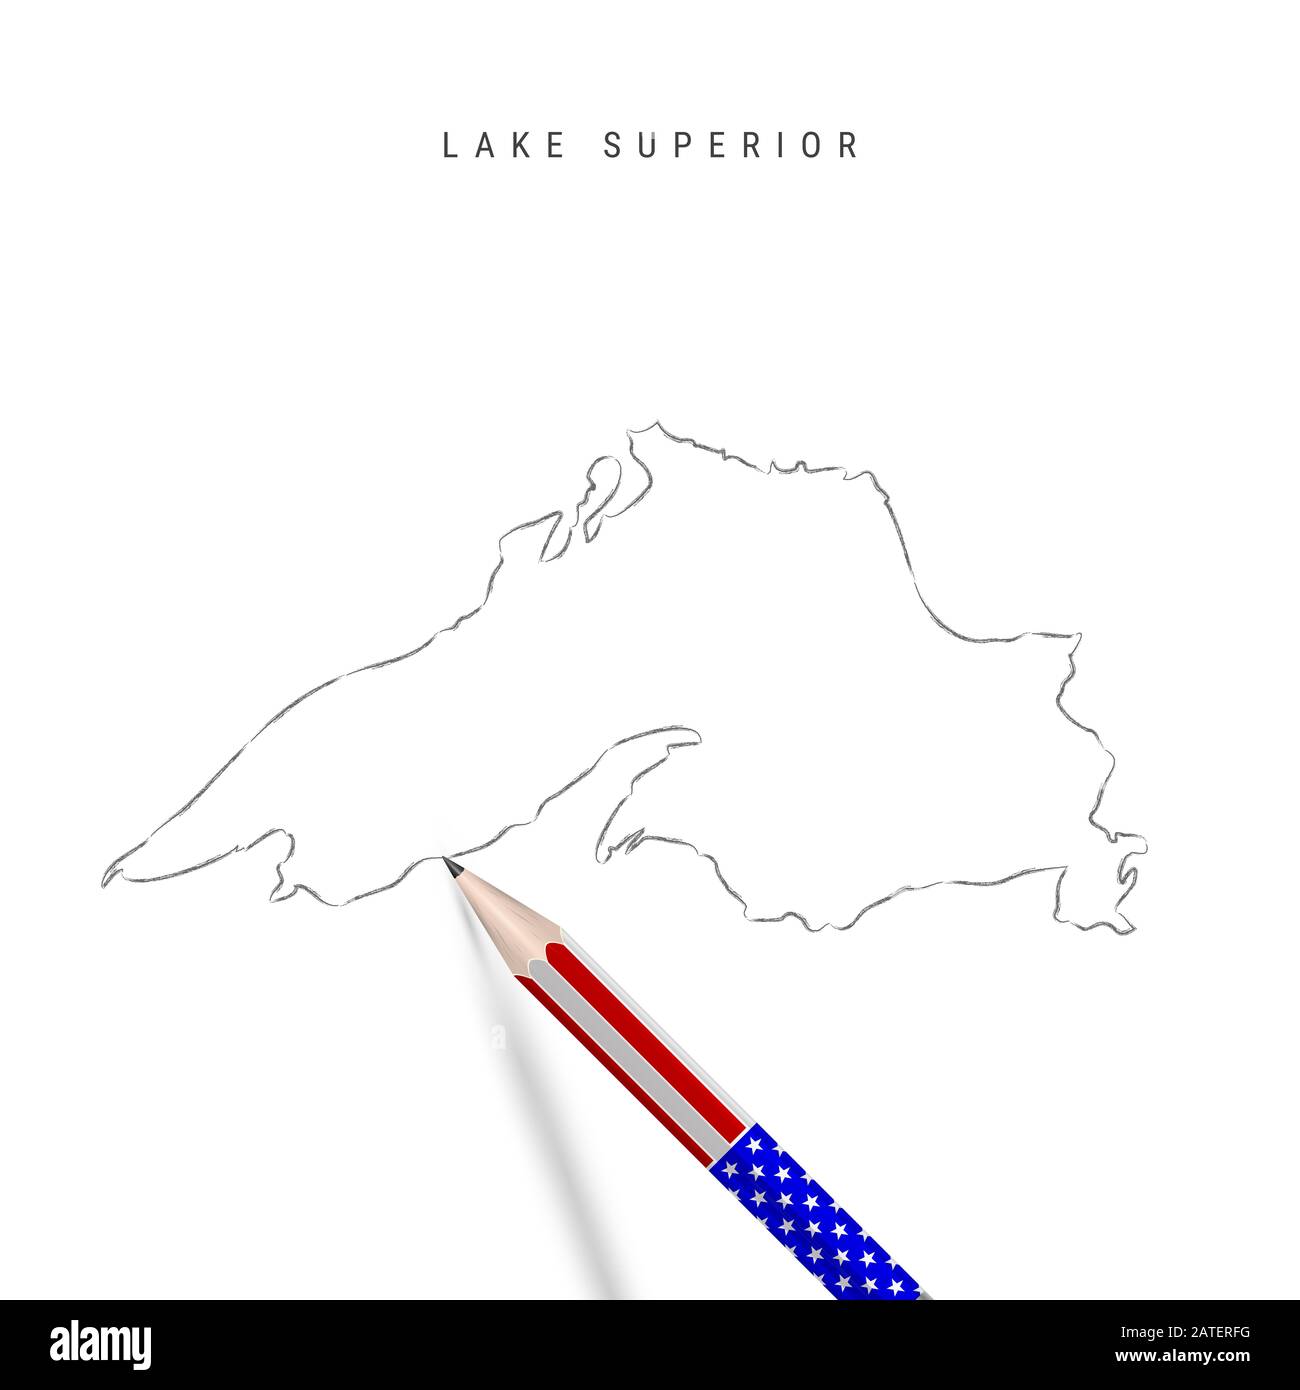 Lake Superior map pencil sketch. Lake Superior outline contour map with 3D pencil in american flag colors. Freehand drawing , hand drawn sketch isolat Stock Photo